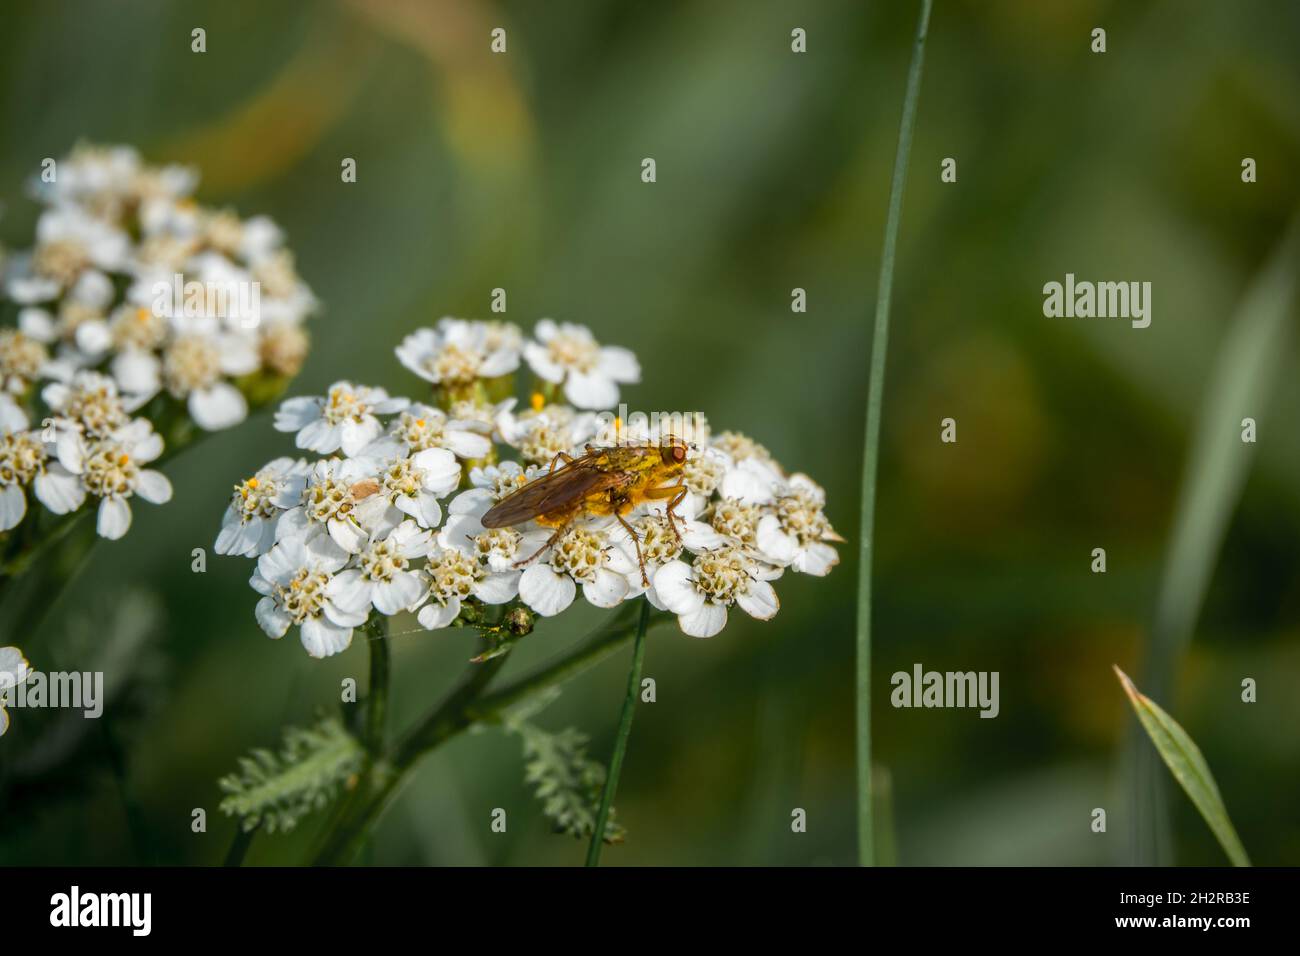 Yellow dung fly (Scathophaga stercoraria) rests atop a common yarrow flower (Achillea millefolium) Stock Photo